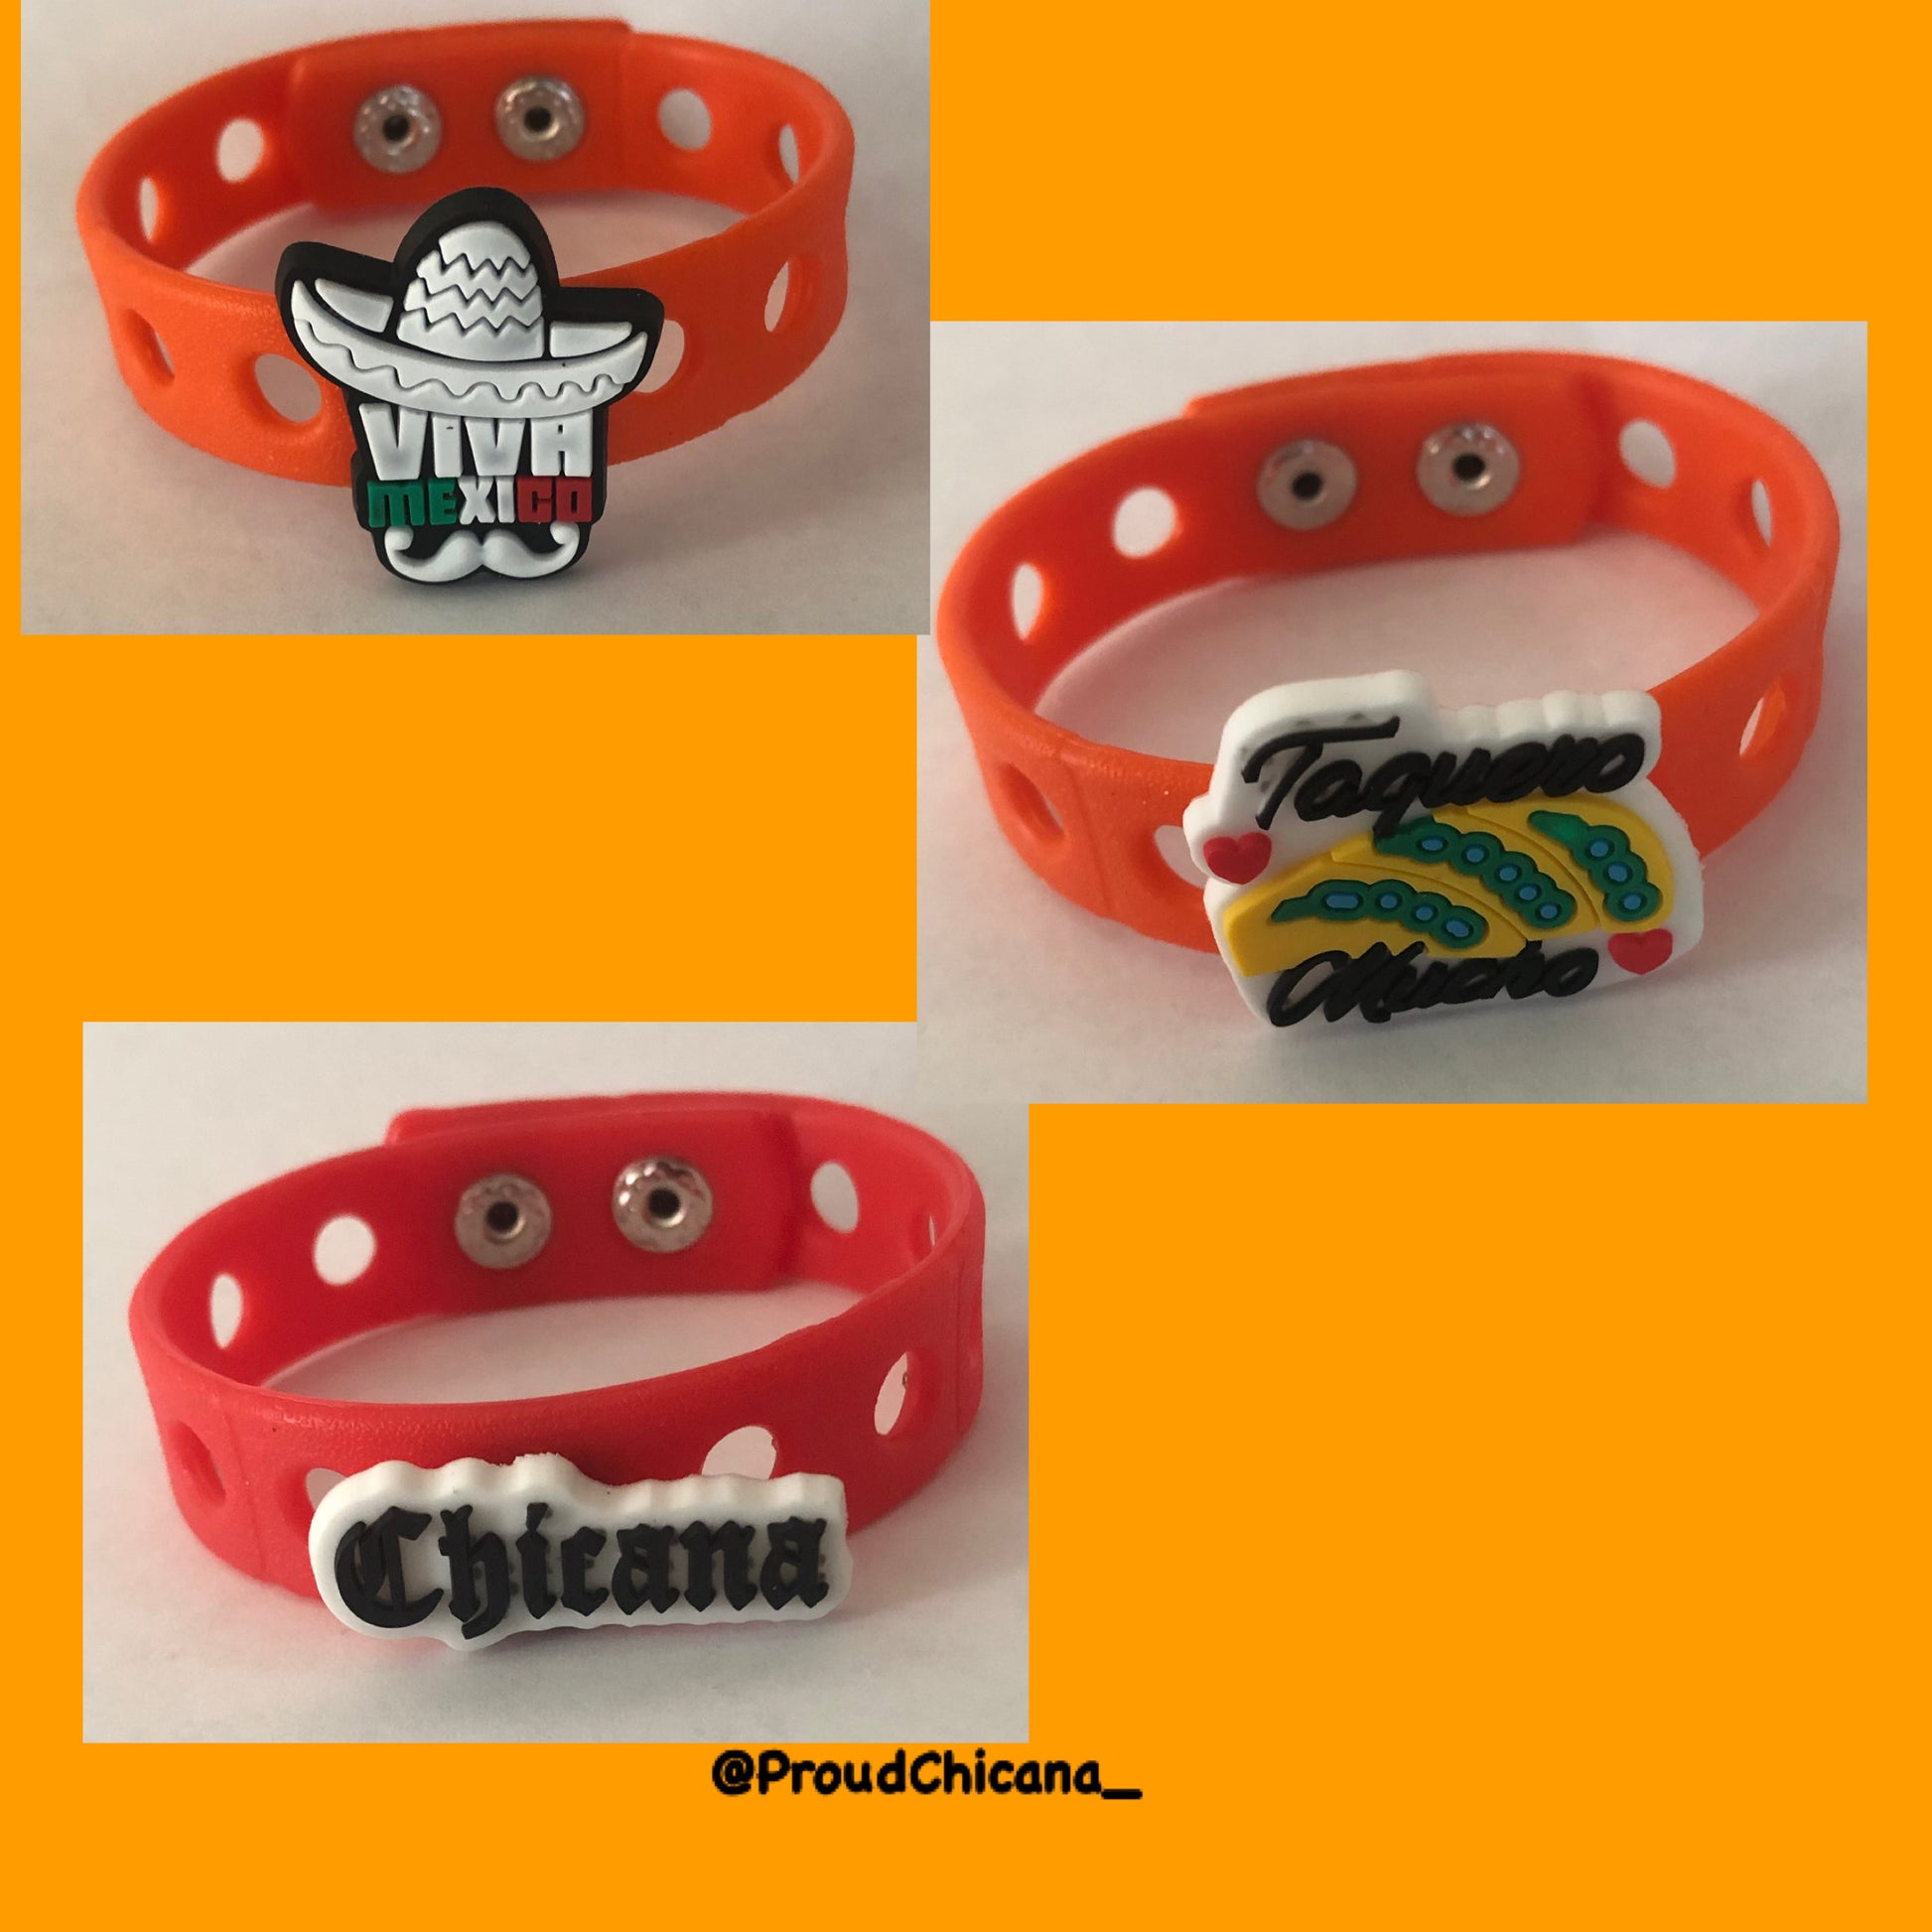 Croc charm bracelets  Latino, Mexican, and Chicano charms – Proud Chicana